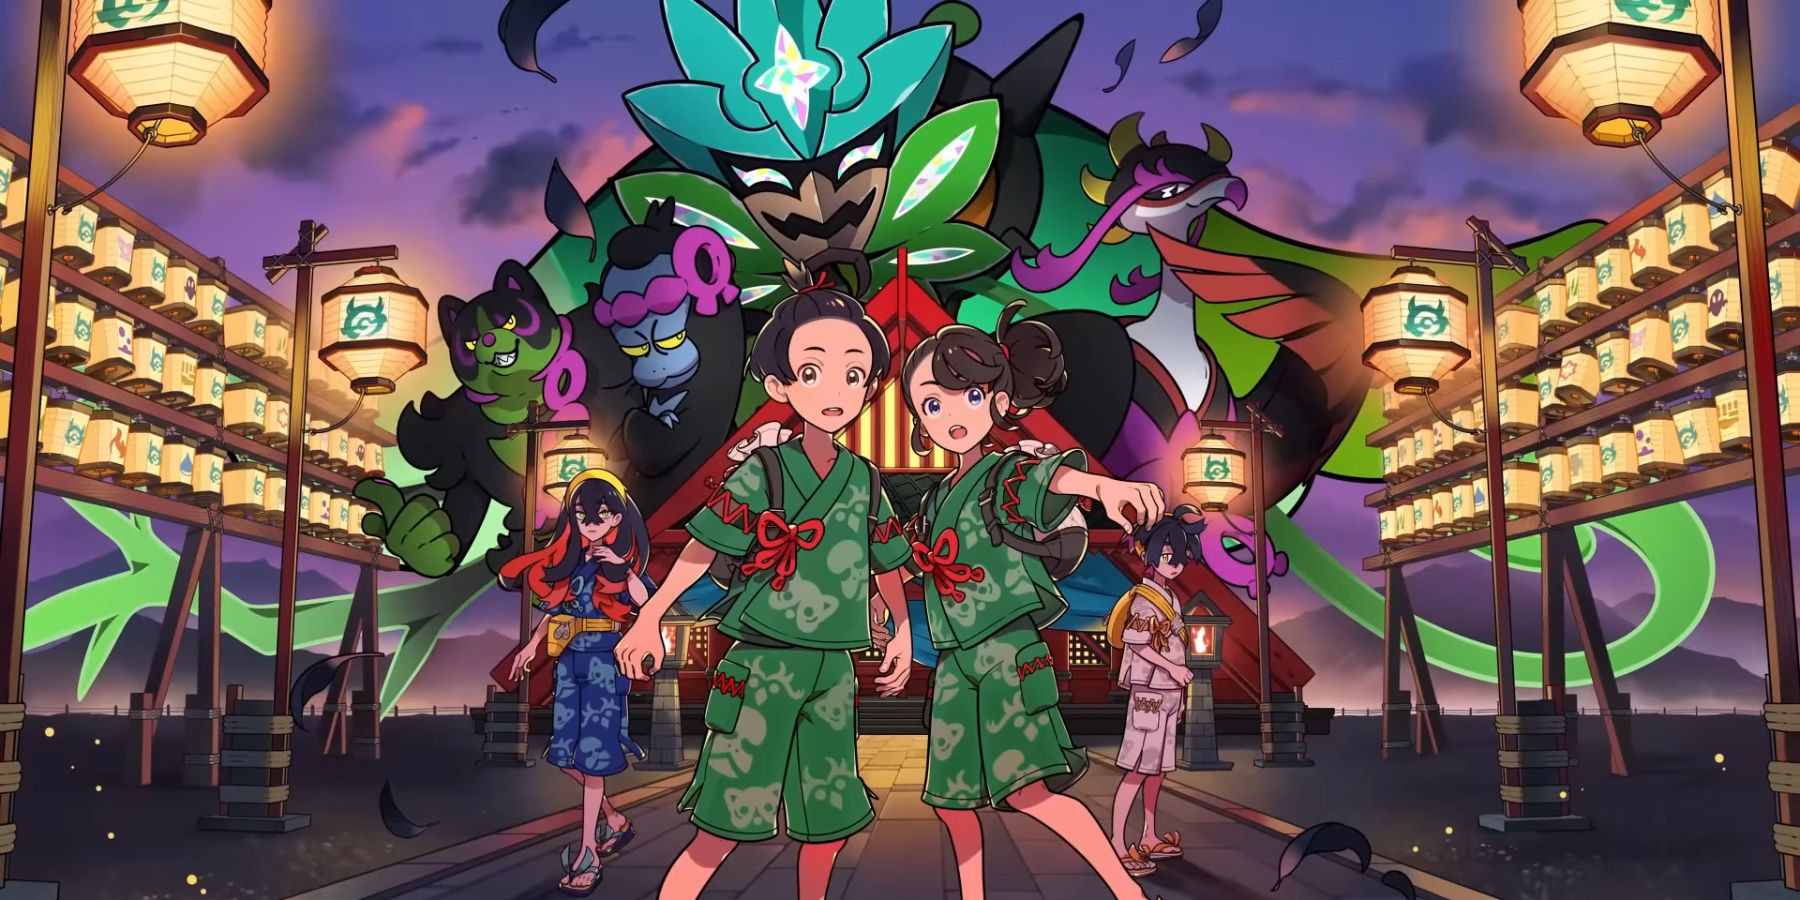 Collage artwork for Pokémon Scarlet and Violet's The Teal Mask DLC, showing the two main characters up front, surrounded by new side characters and Pokémon in a festival atmosphere.